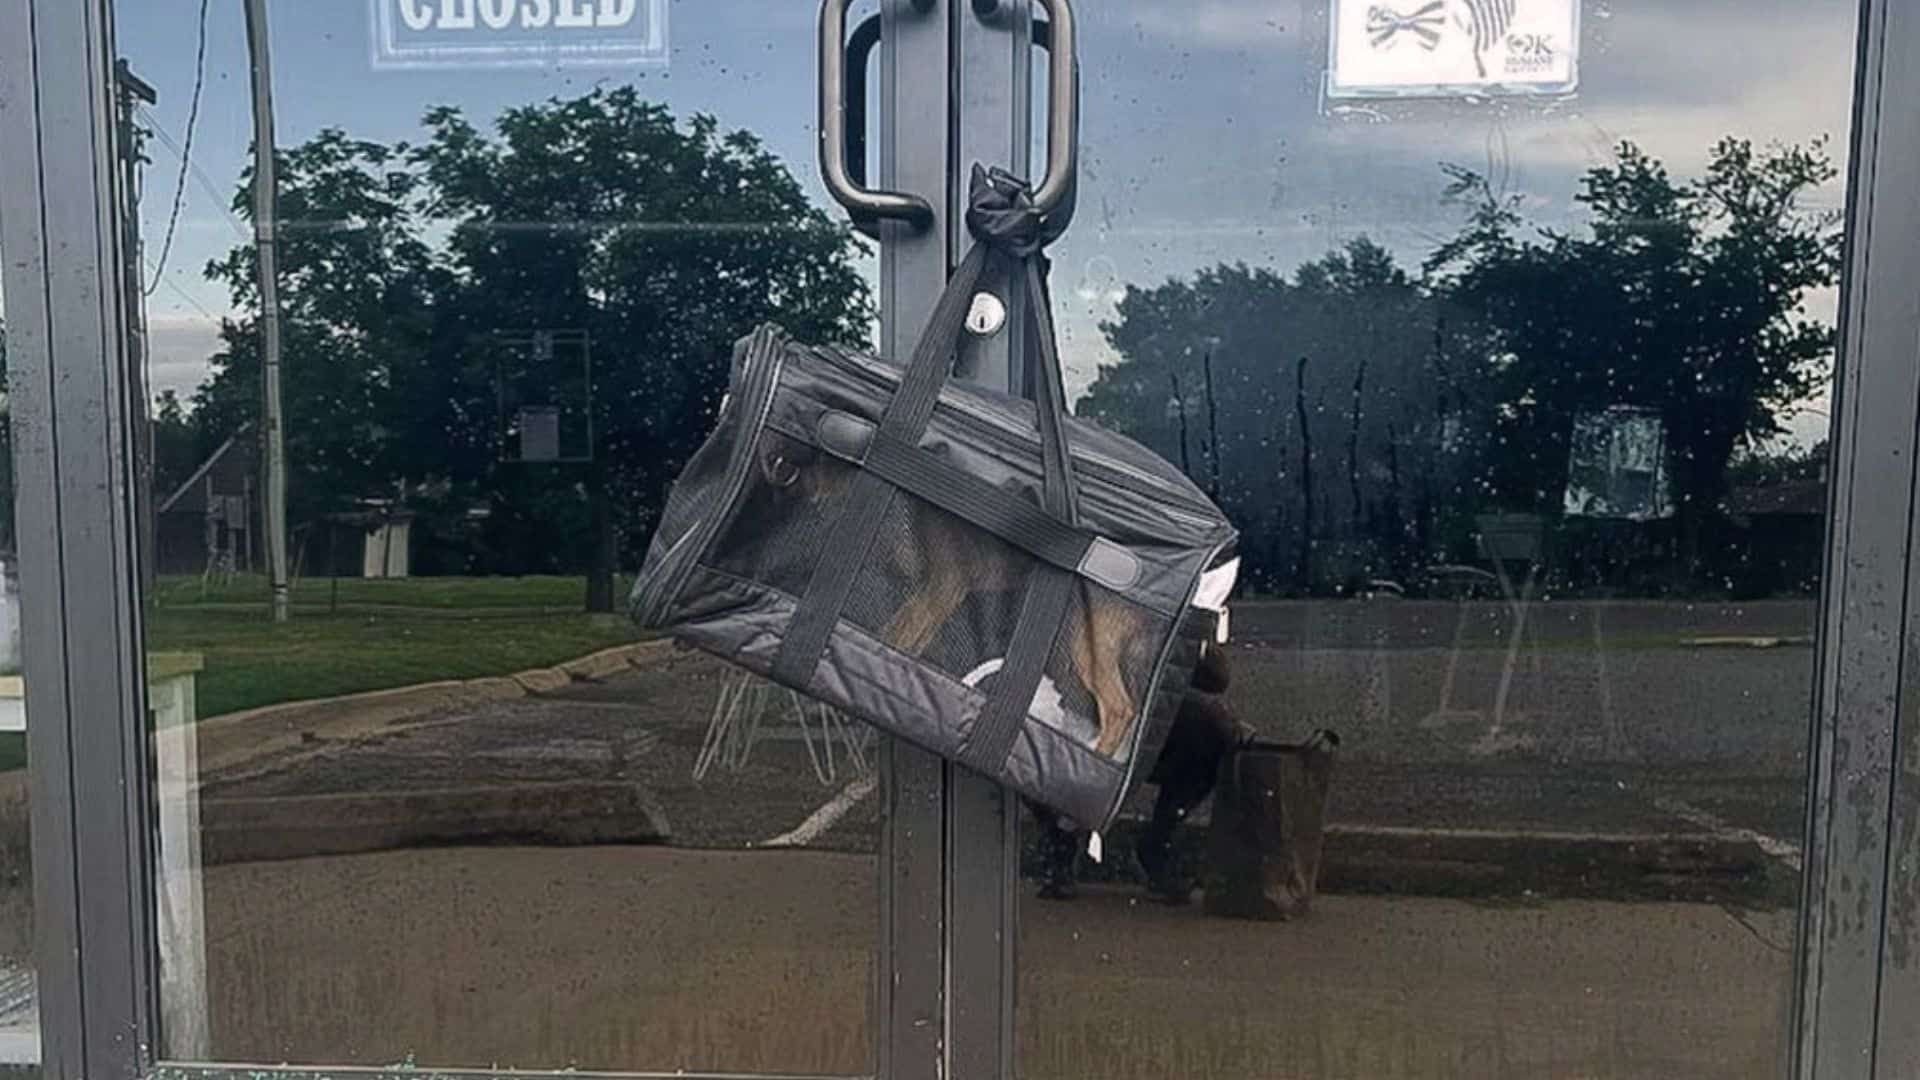 Man Realized There Was A Bag Tied To A Door Handle So He Opened It And Was Pleasantly Surprised